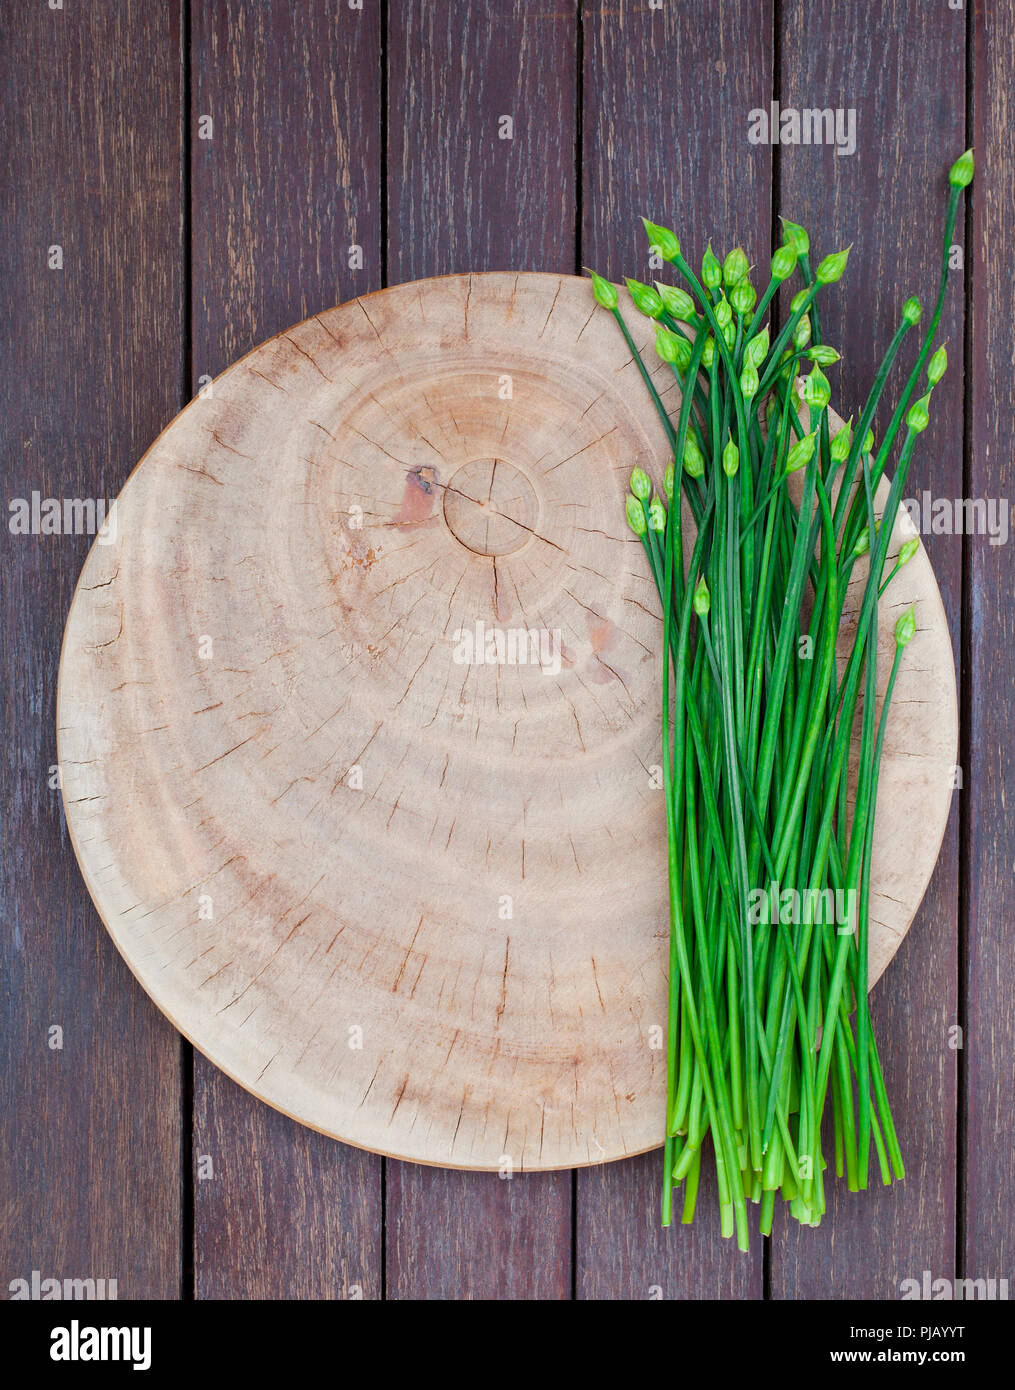 The Best Non-Toxic Cutting Boards - Umbel Organics